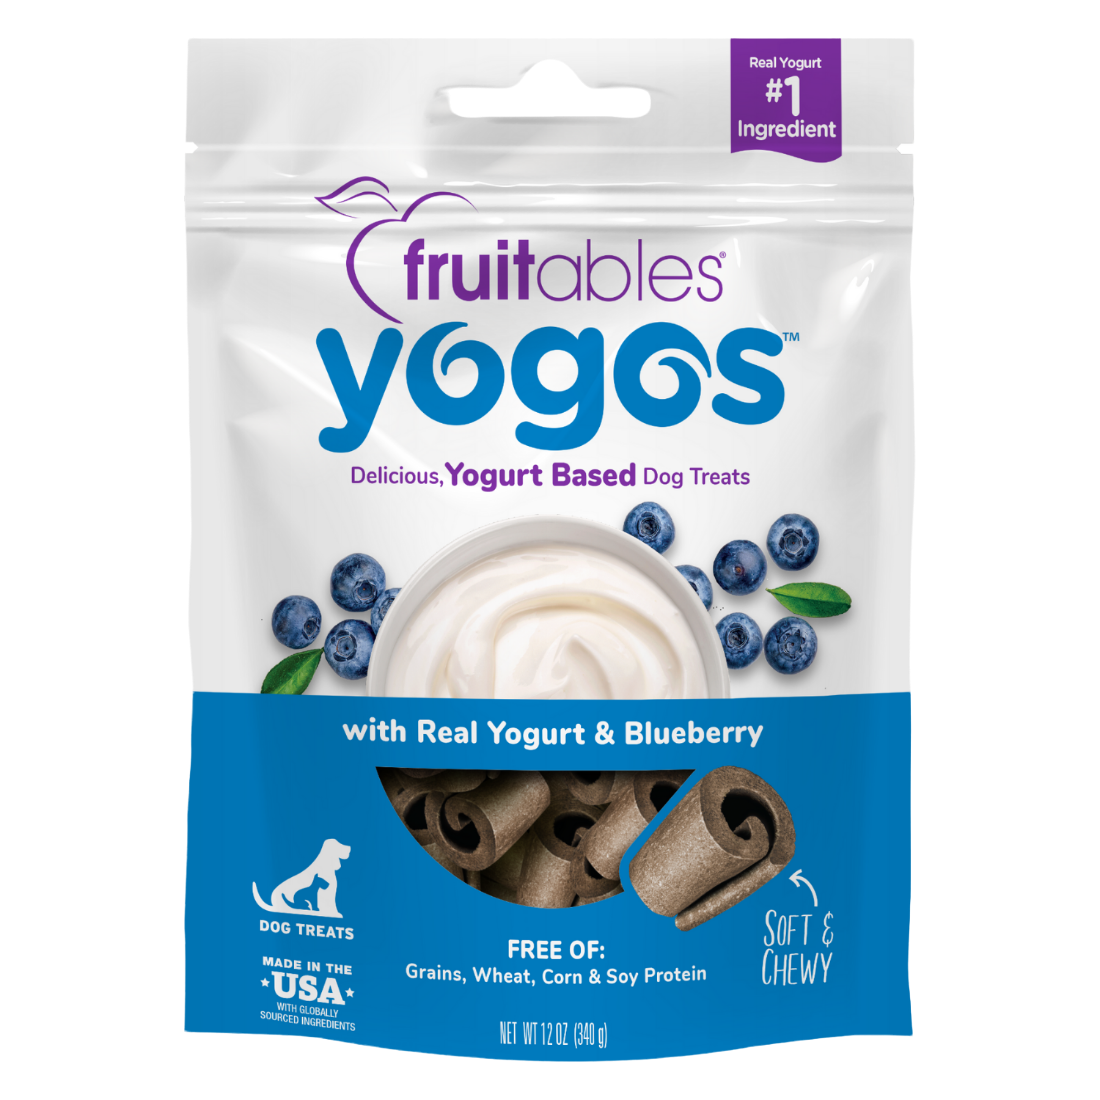 Fruitables 12 oz Yogos Blueberry Smoothie Dog Treats front packaging